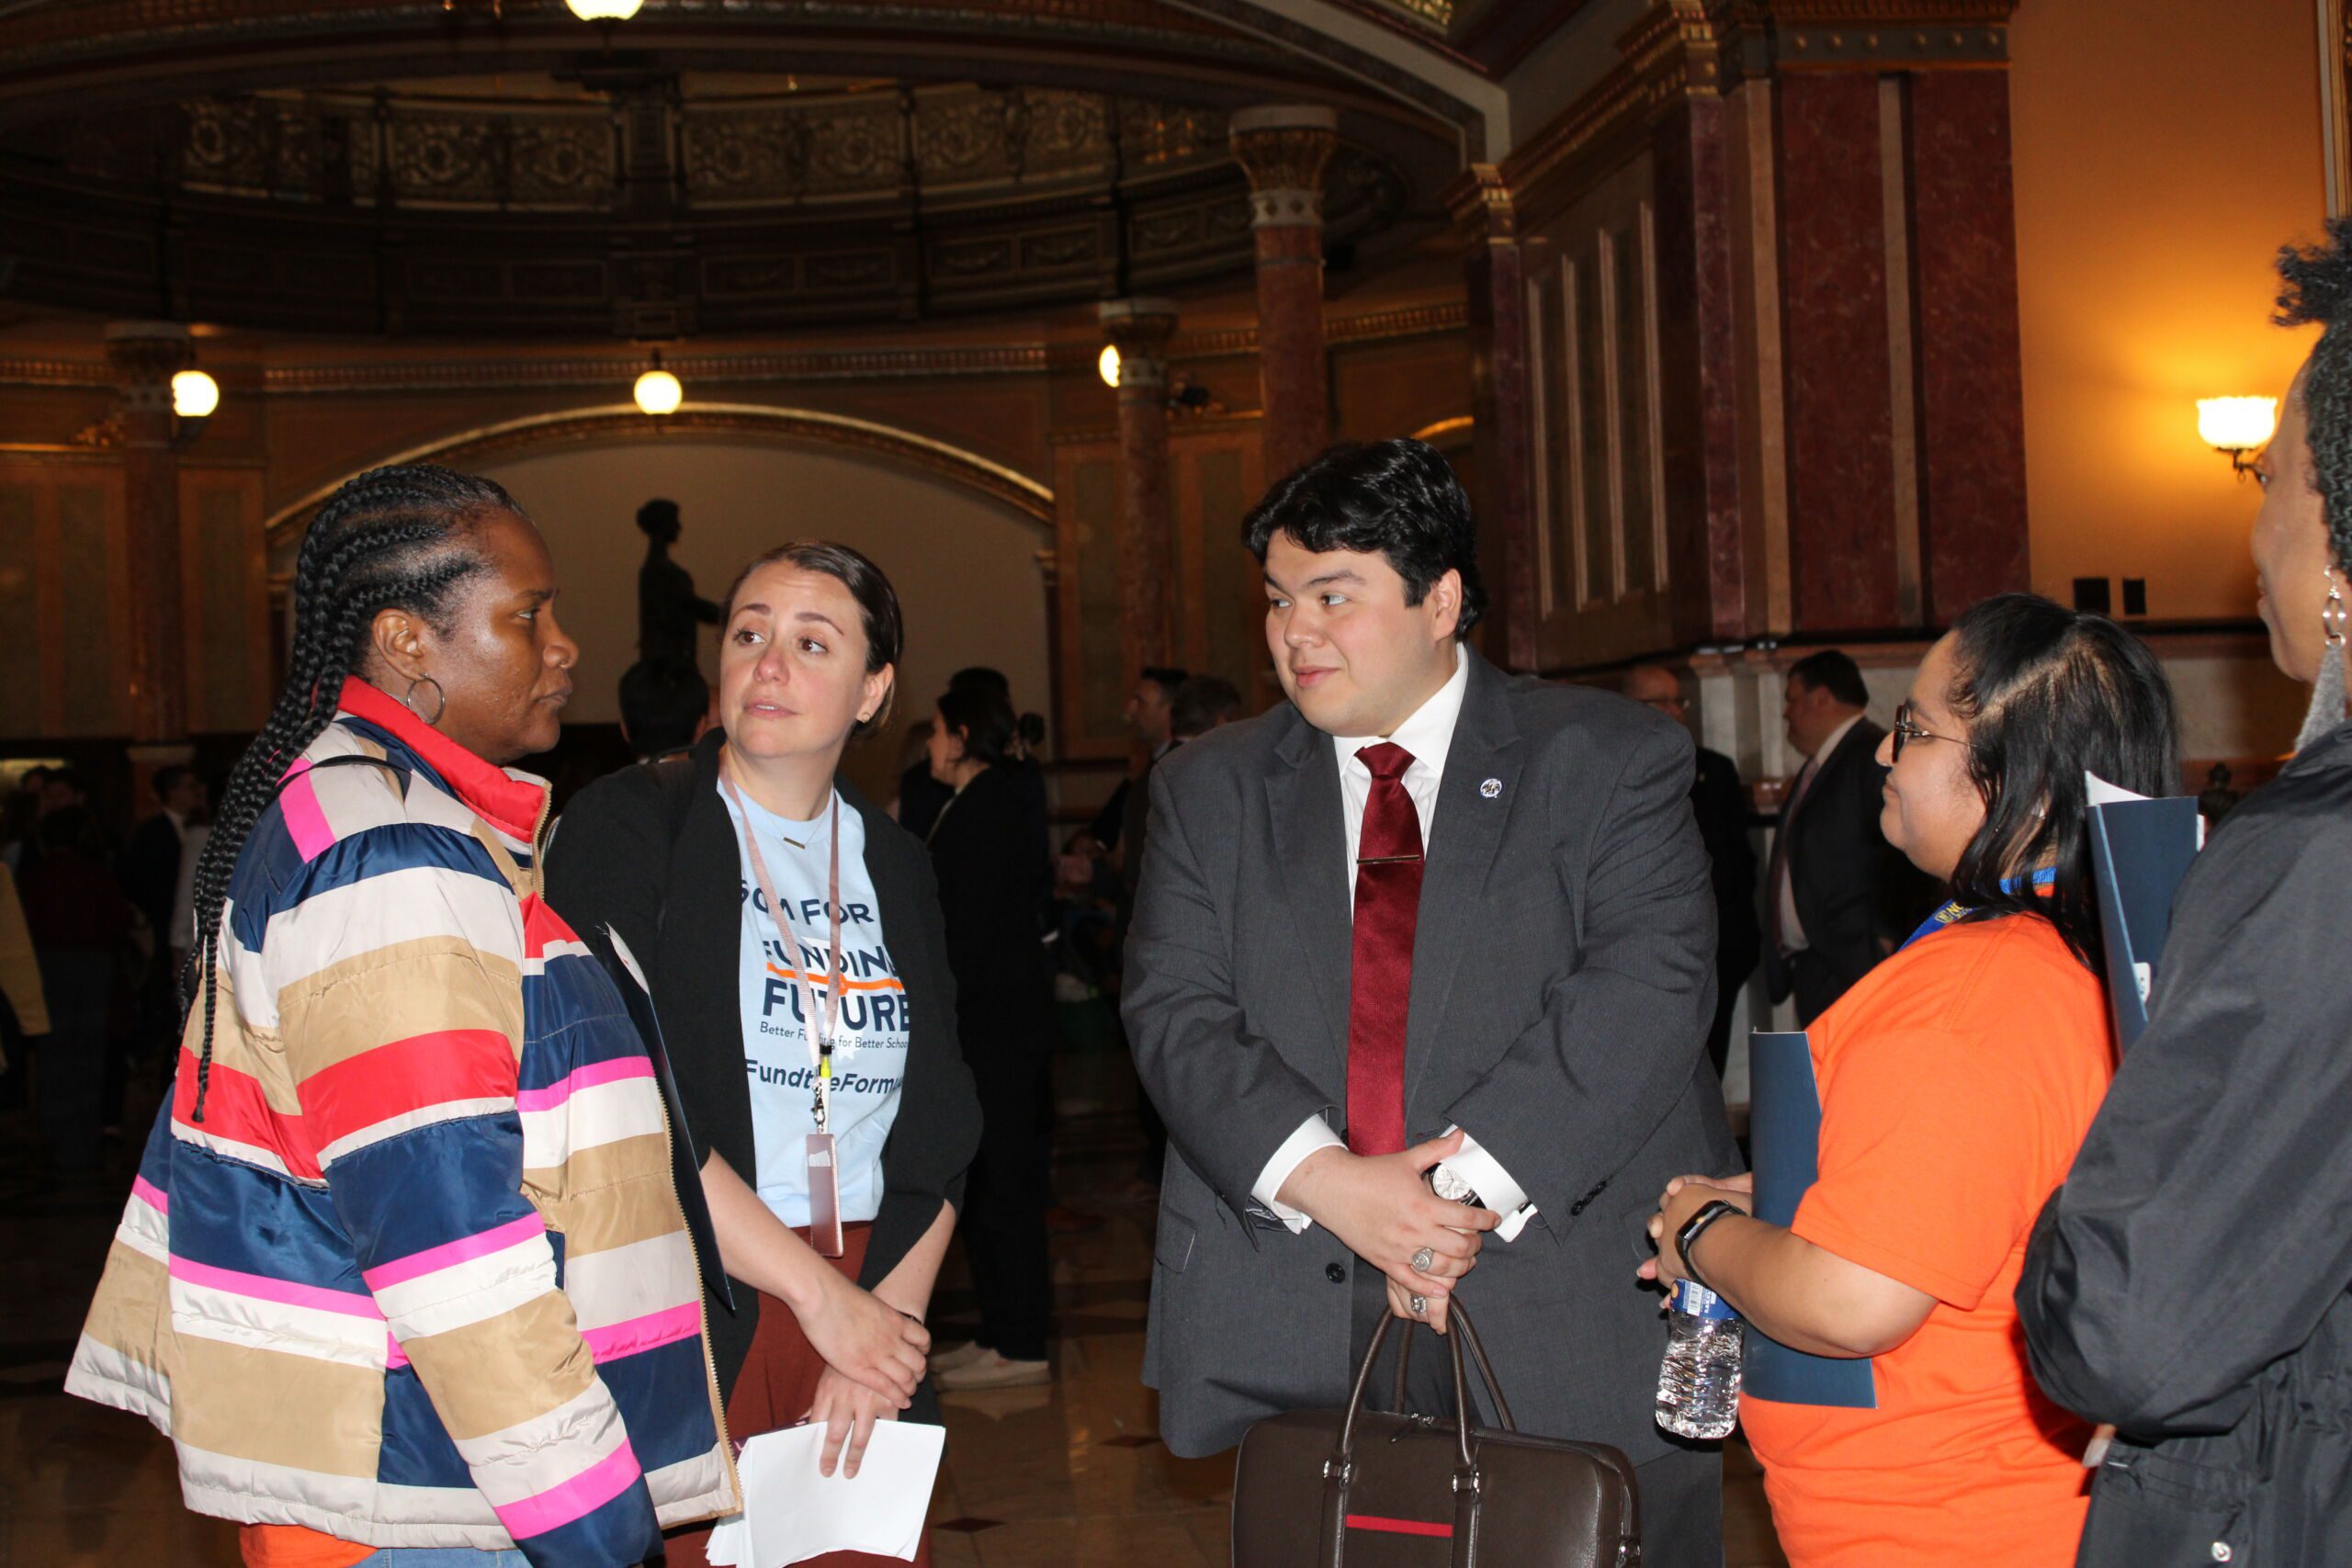 Photo shows Noble Schools' parents and staff talking with Illinois State House representative in the hallways of the Illinois State Capitol building. From left to right, the people in the image are: Regina White, parent at DRW College Prep and The Noble Academy; Ellen Moiani, the Director of Government and Community Affairs at Noble Schools; representative, , and